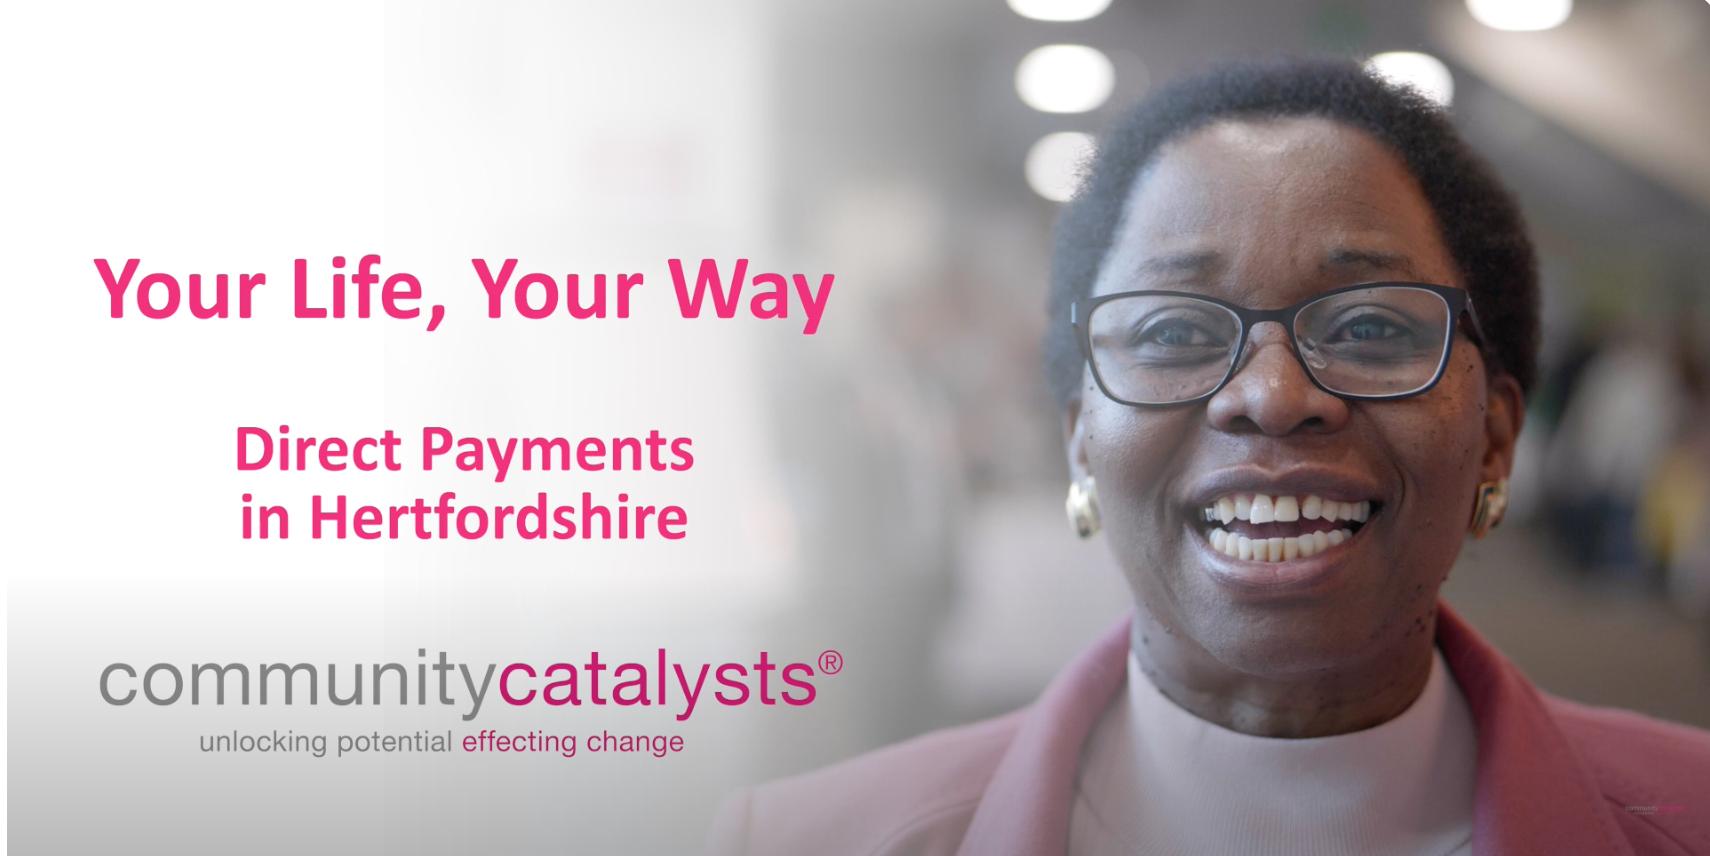 “Your life, your way” – watch our video playlist from our event in collaboration with Community Catalysts